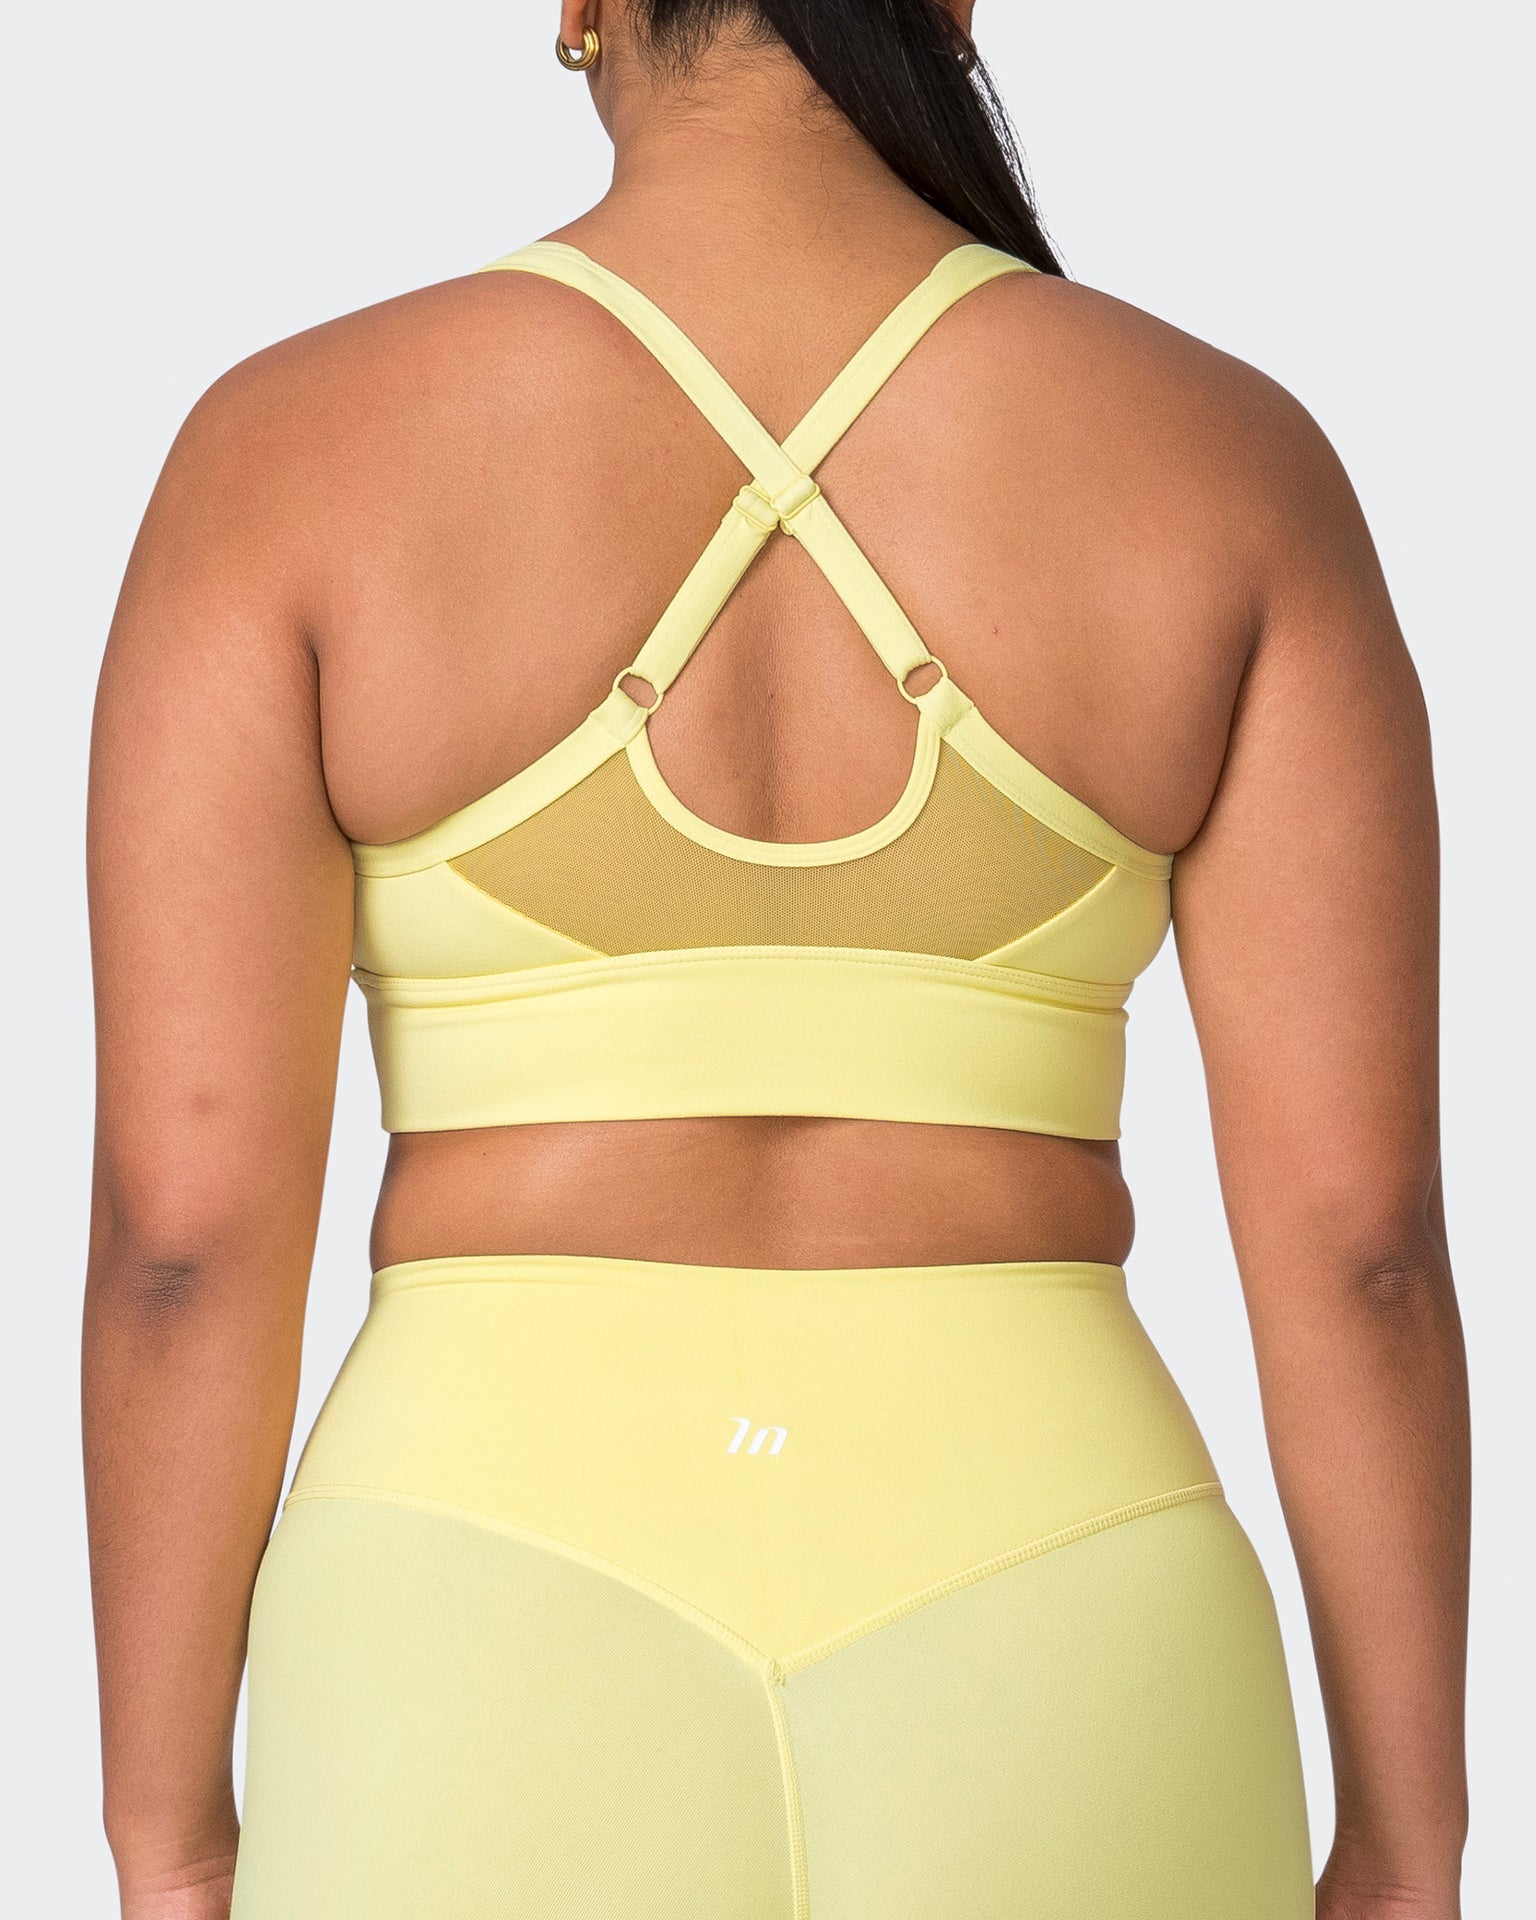 Muscle Nation Sports Bras Replay Bra - Sunny Lime